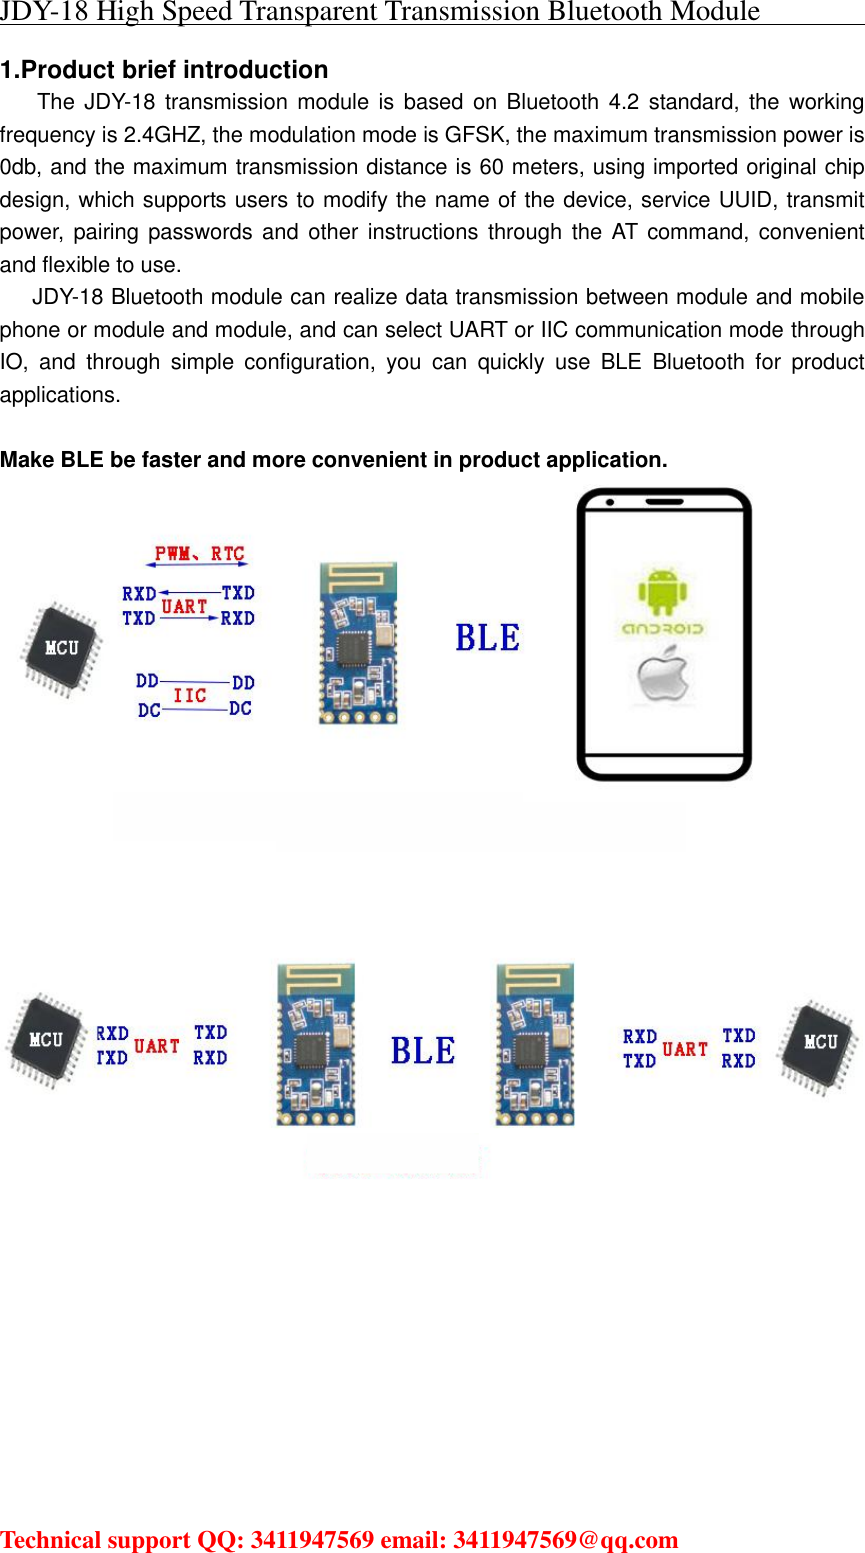 JDY-18 High Speed Transparent Transmission Bluetooth Module                                     Technical support QQ: 3411947569 email: 3411947569@qq.com   1.Product brief introduction      The  JDY-18  transmission module is  based on  Bluetooth 4.2  standard,  the  working frequency is 2.4GHZ, the modulation mode is GFSK, the maximum transmission power is 0db, and the maximum transmission distance is 60 meters, using imported original chip design, which supports users to modify the name of the device, service UUID, transmit power,  pairing passwords  and  other  instructions through the  AT command, convenient and flexible to use. JDY-18 Bluetooth module can realize data transmission between module and mobile phone or module and module, and can select UART or IIC communication mode through IO,  and  through  simple  configuration,  you  can  quickly  use  BLE  Bluetooth  for  product applications.  Make BLE be faster and more convenient in product application.      